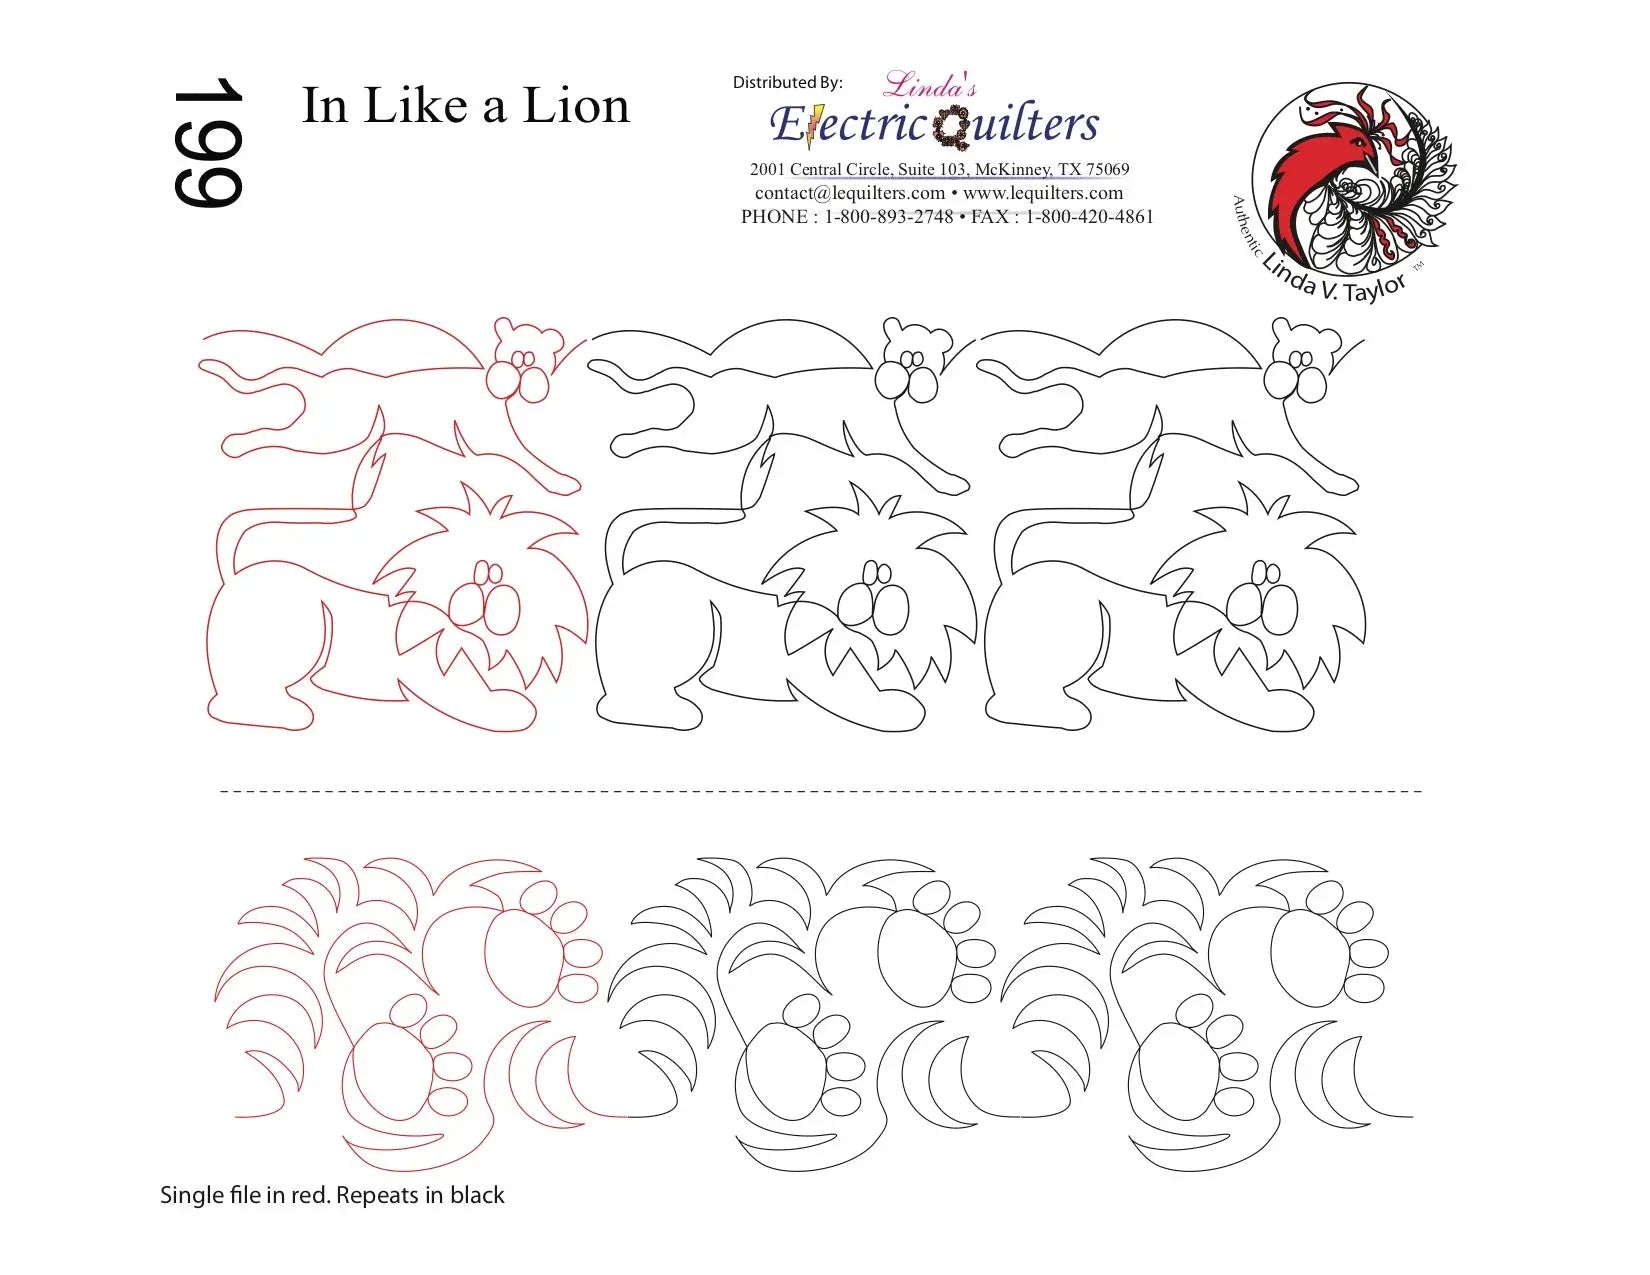 199 In Like A Lion Pantograph by Linda V. Taylor - Linda's Electric Quilters